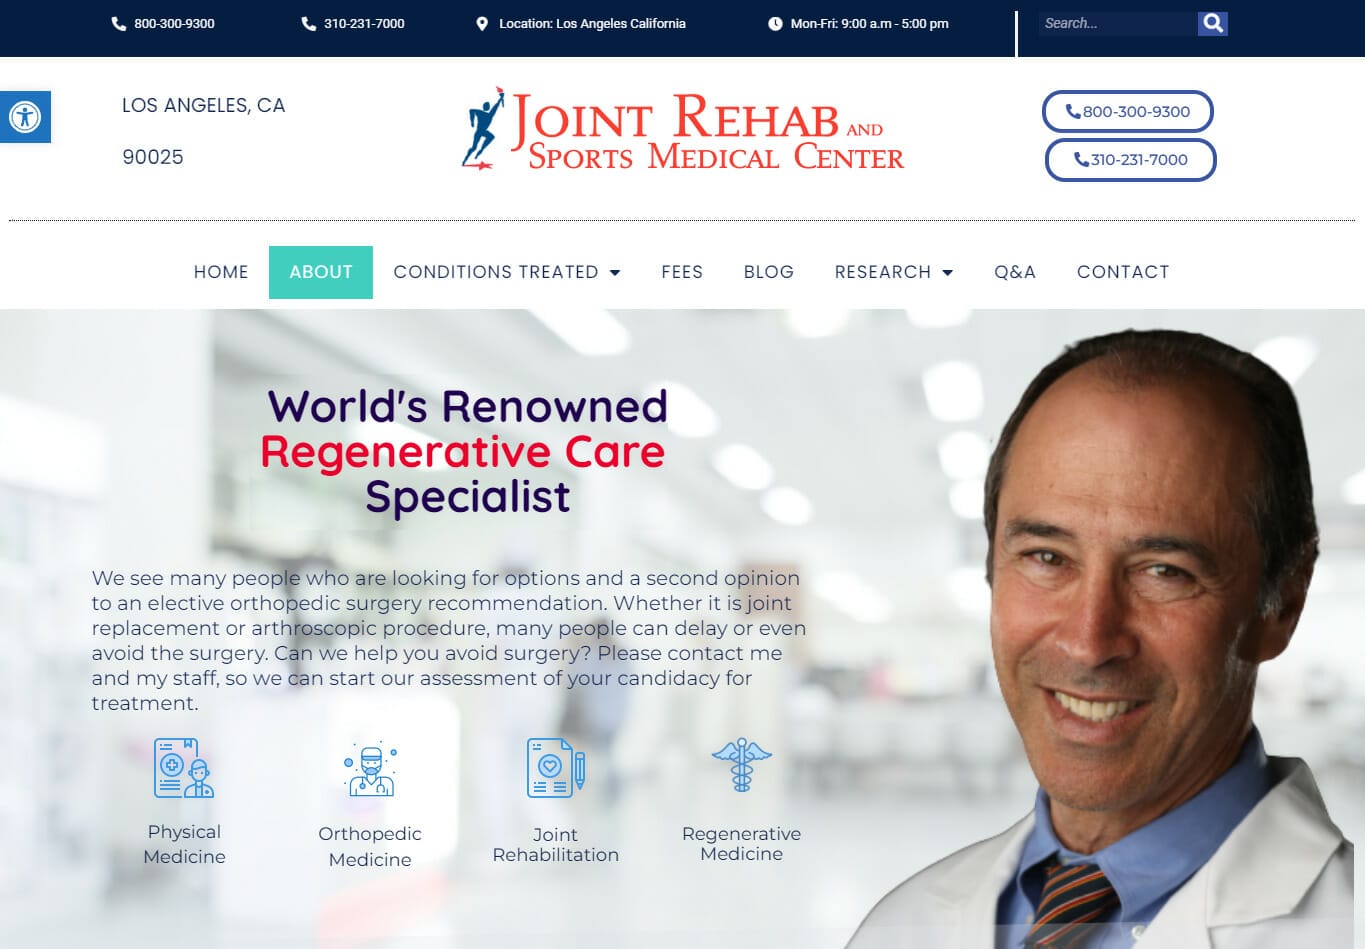 joint-rehab-and-sports-medical-center-homepage